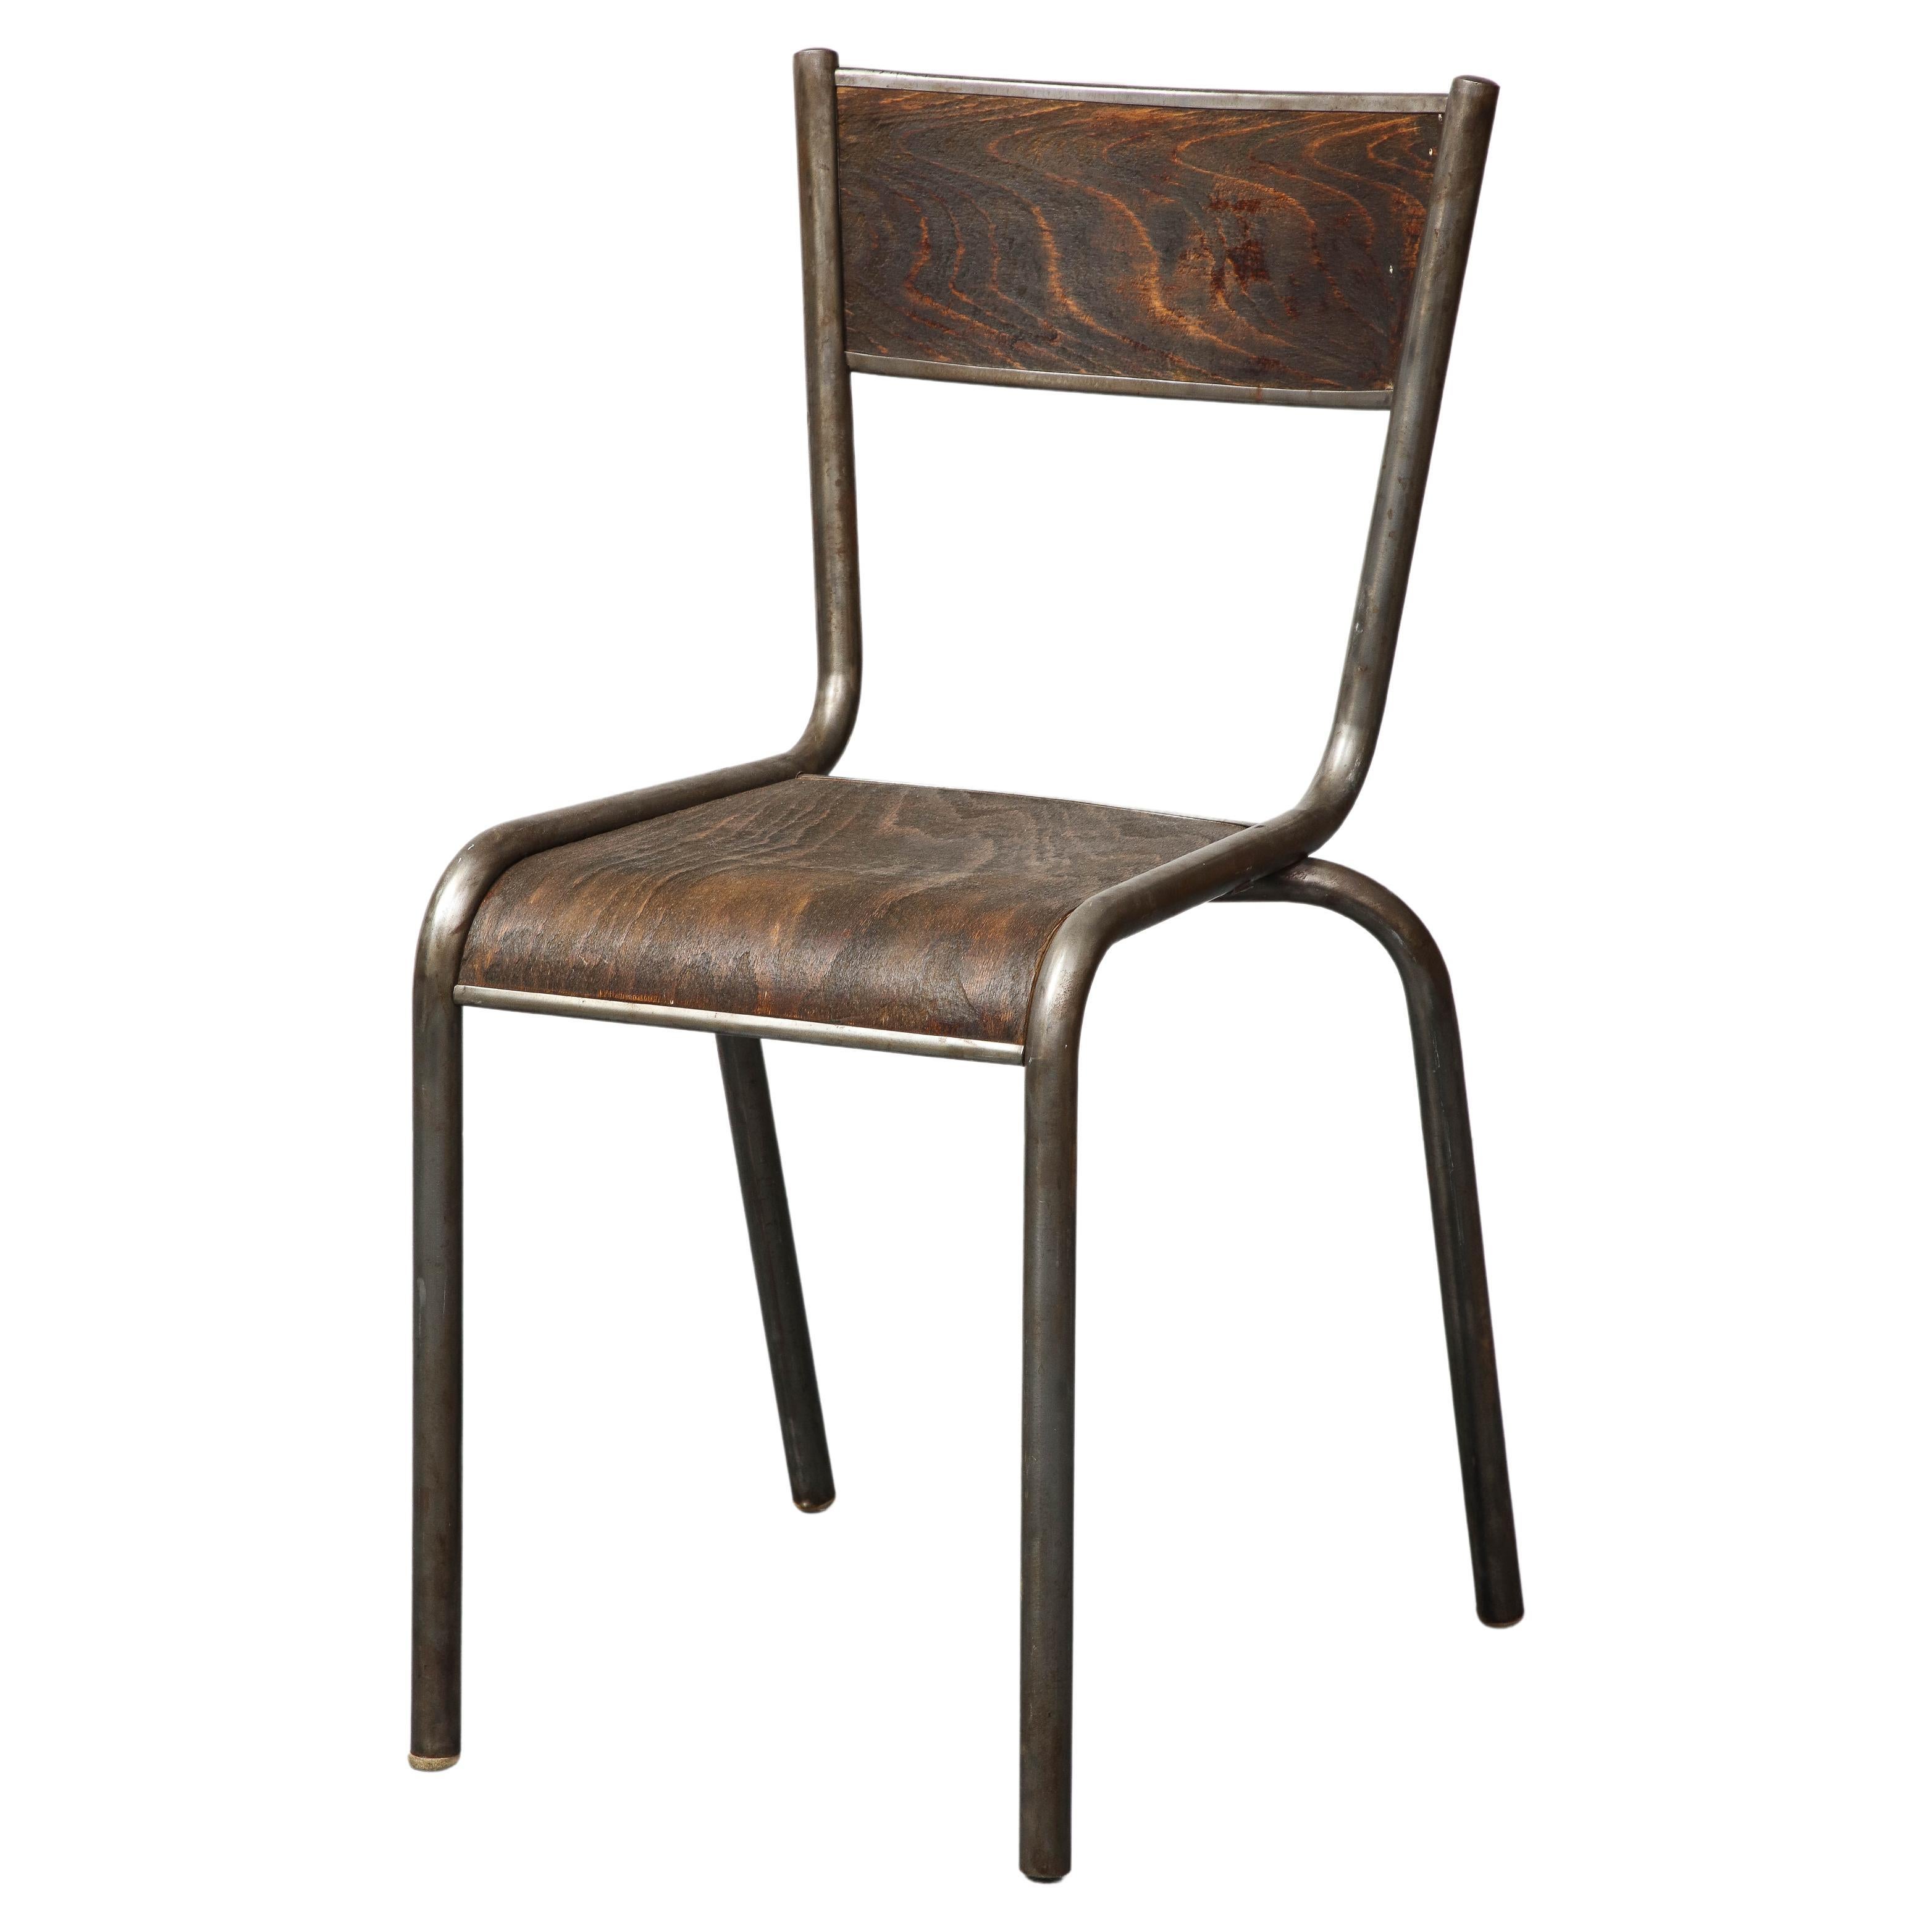 Polished Steel and Bentwood Chair, France, c. 1940 For Sale